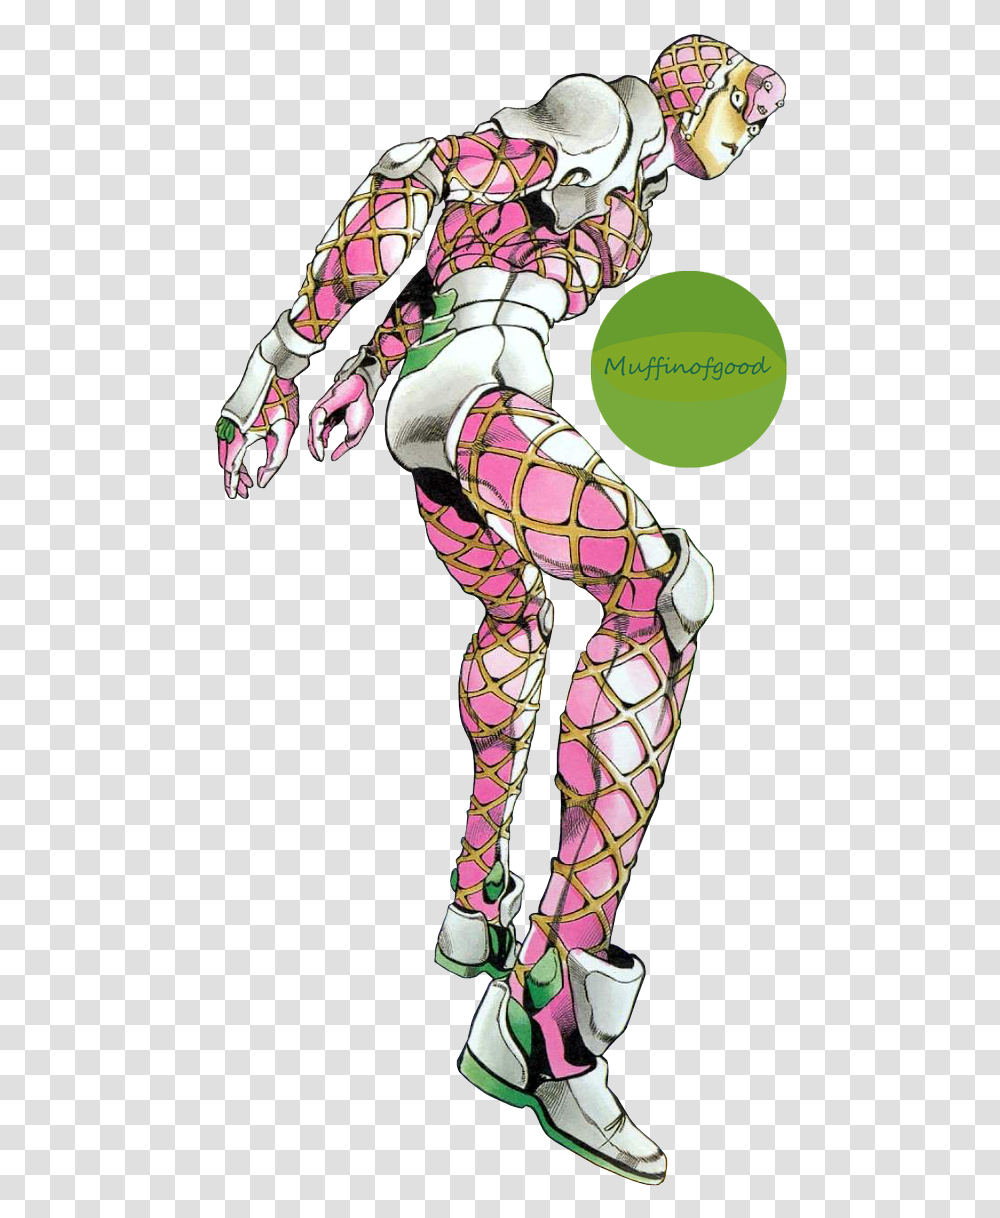 King Crimson Part 5 By Muffinofgood King Crimson Genderbend, Pants, Apparel, Person Transparent Png